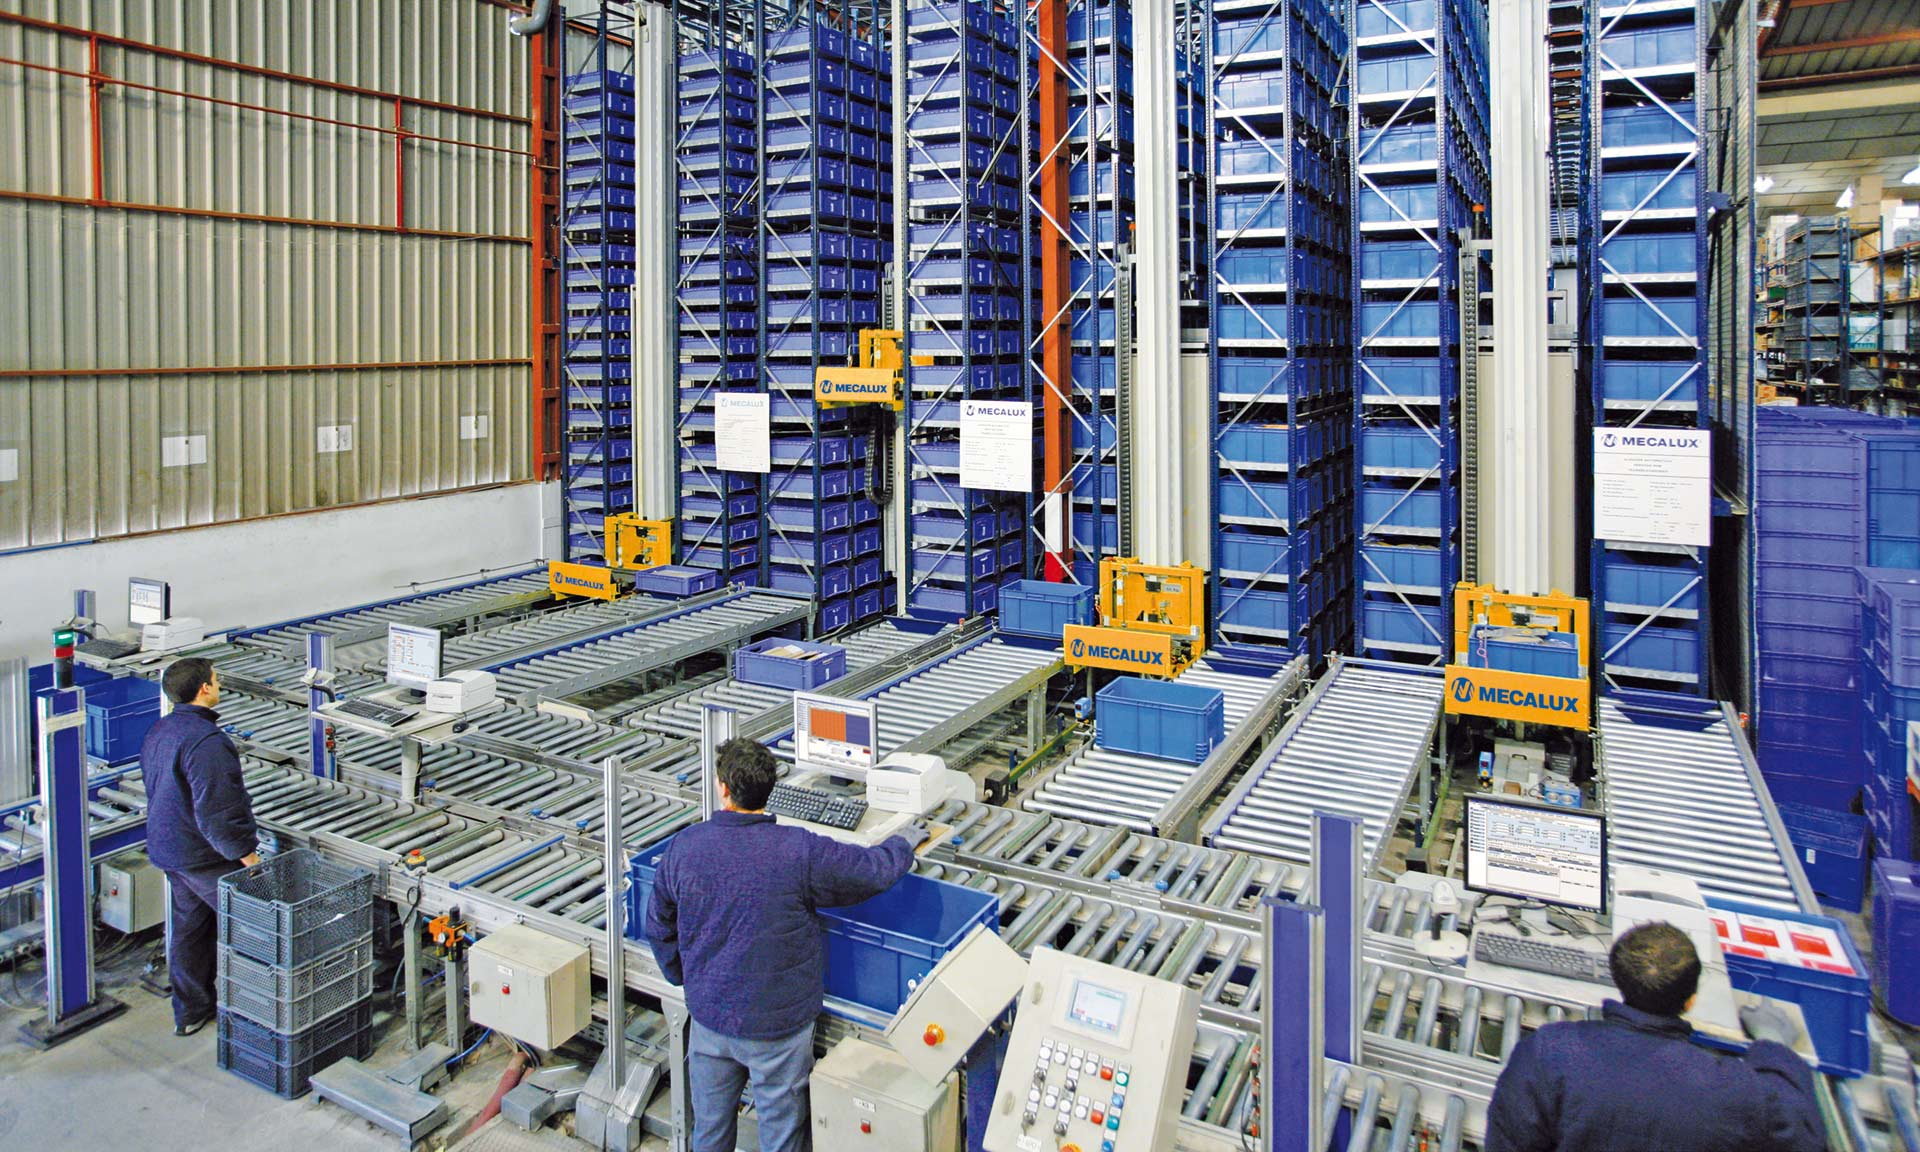 The goods-to-person order picking method combines automated systems with ergonomic pick stations